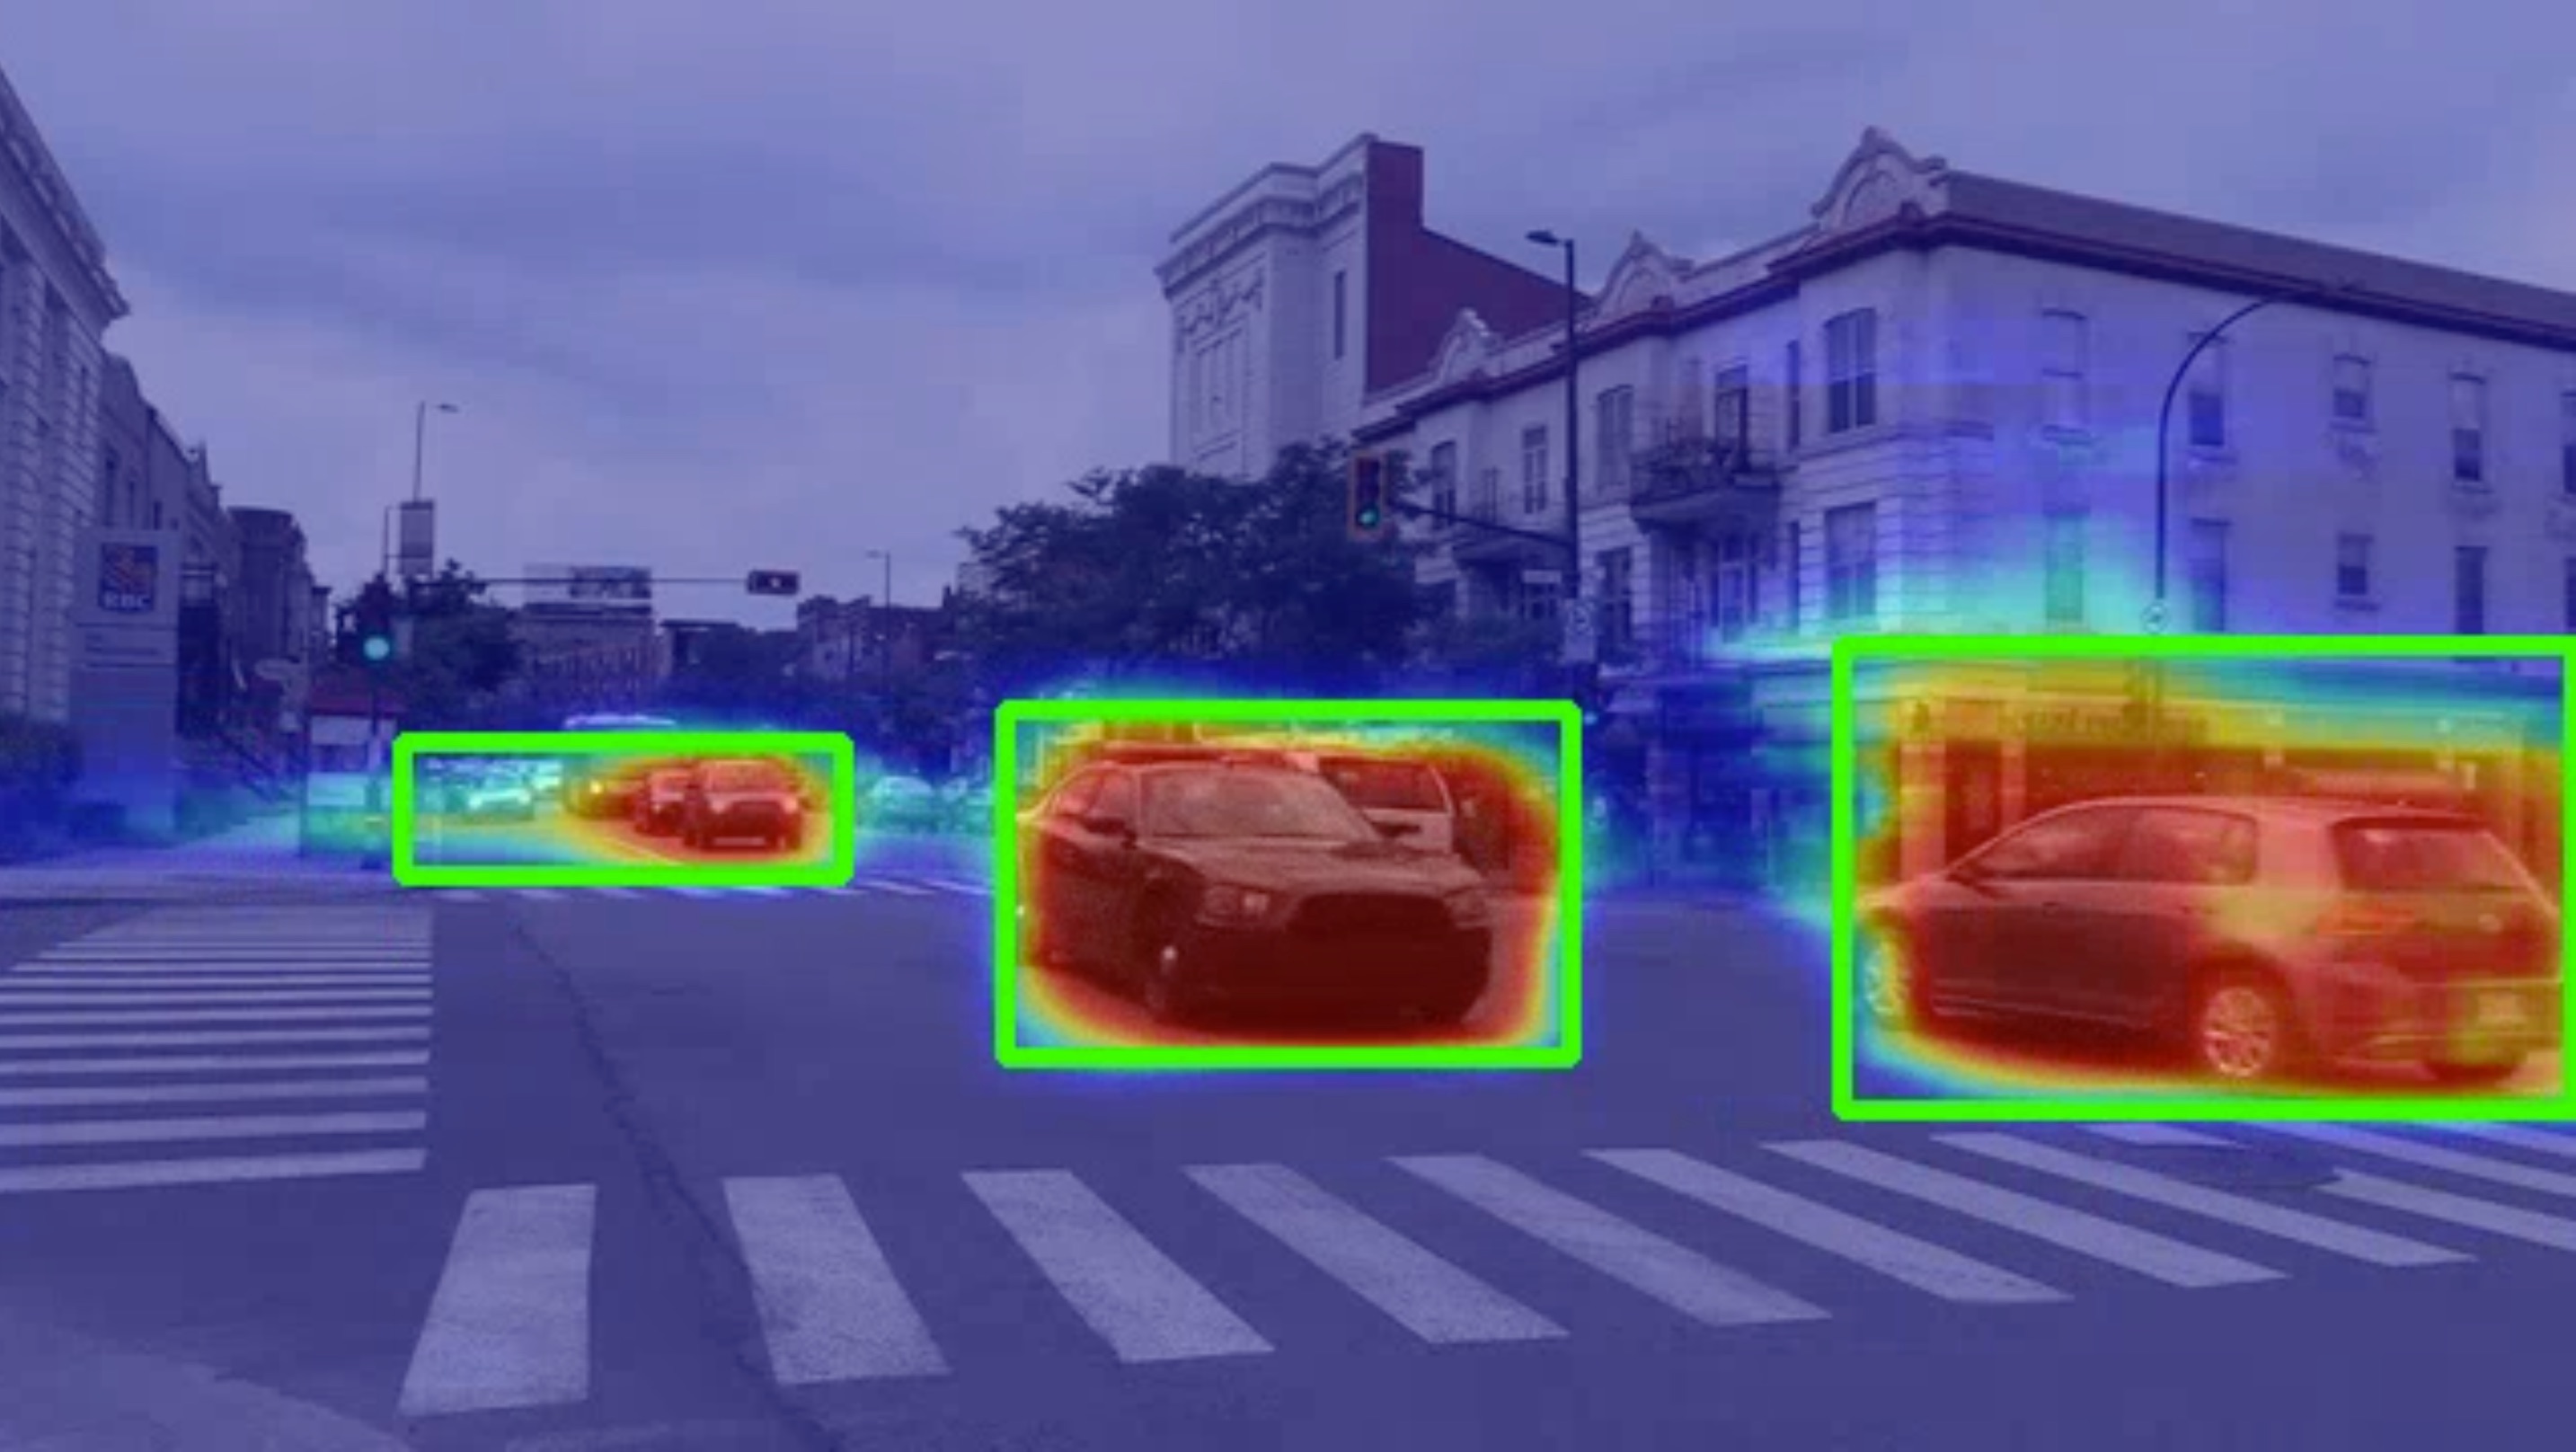 /building-real-time-vehicle-detection-system-0d1g3t0g feature image